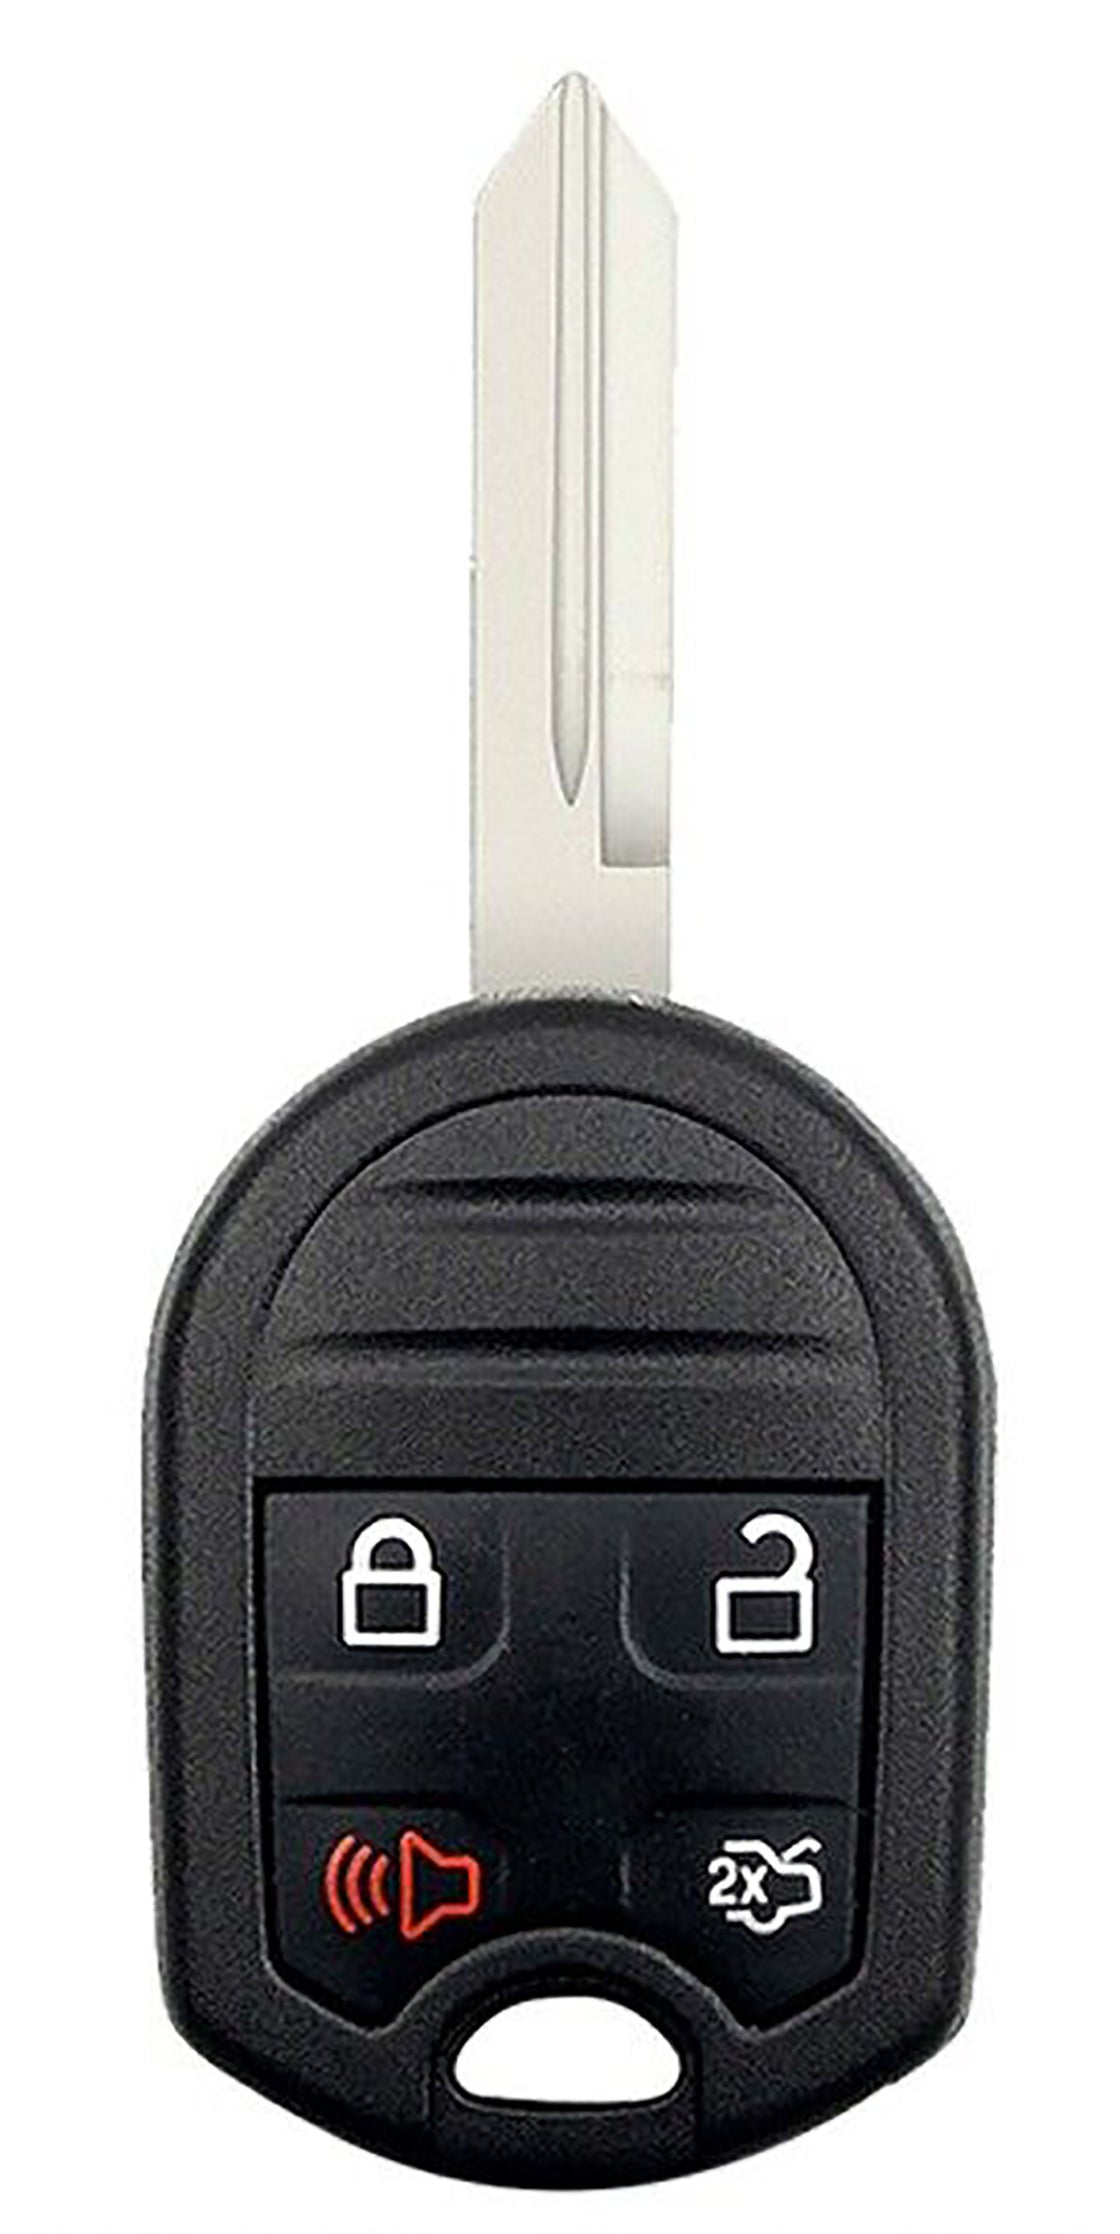 1x New Replacement Keyless Entry Remote Key Fob Compatible with & Fit For Ford Mazda Lincoln Mercury - MPN CWTWB1U793-FL-02